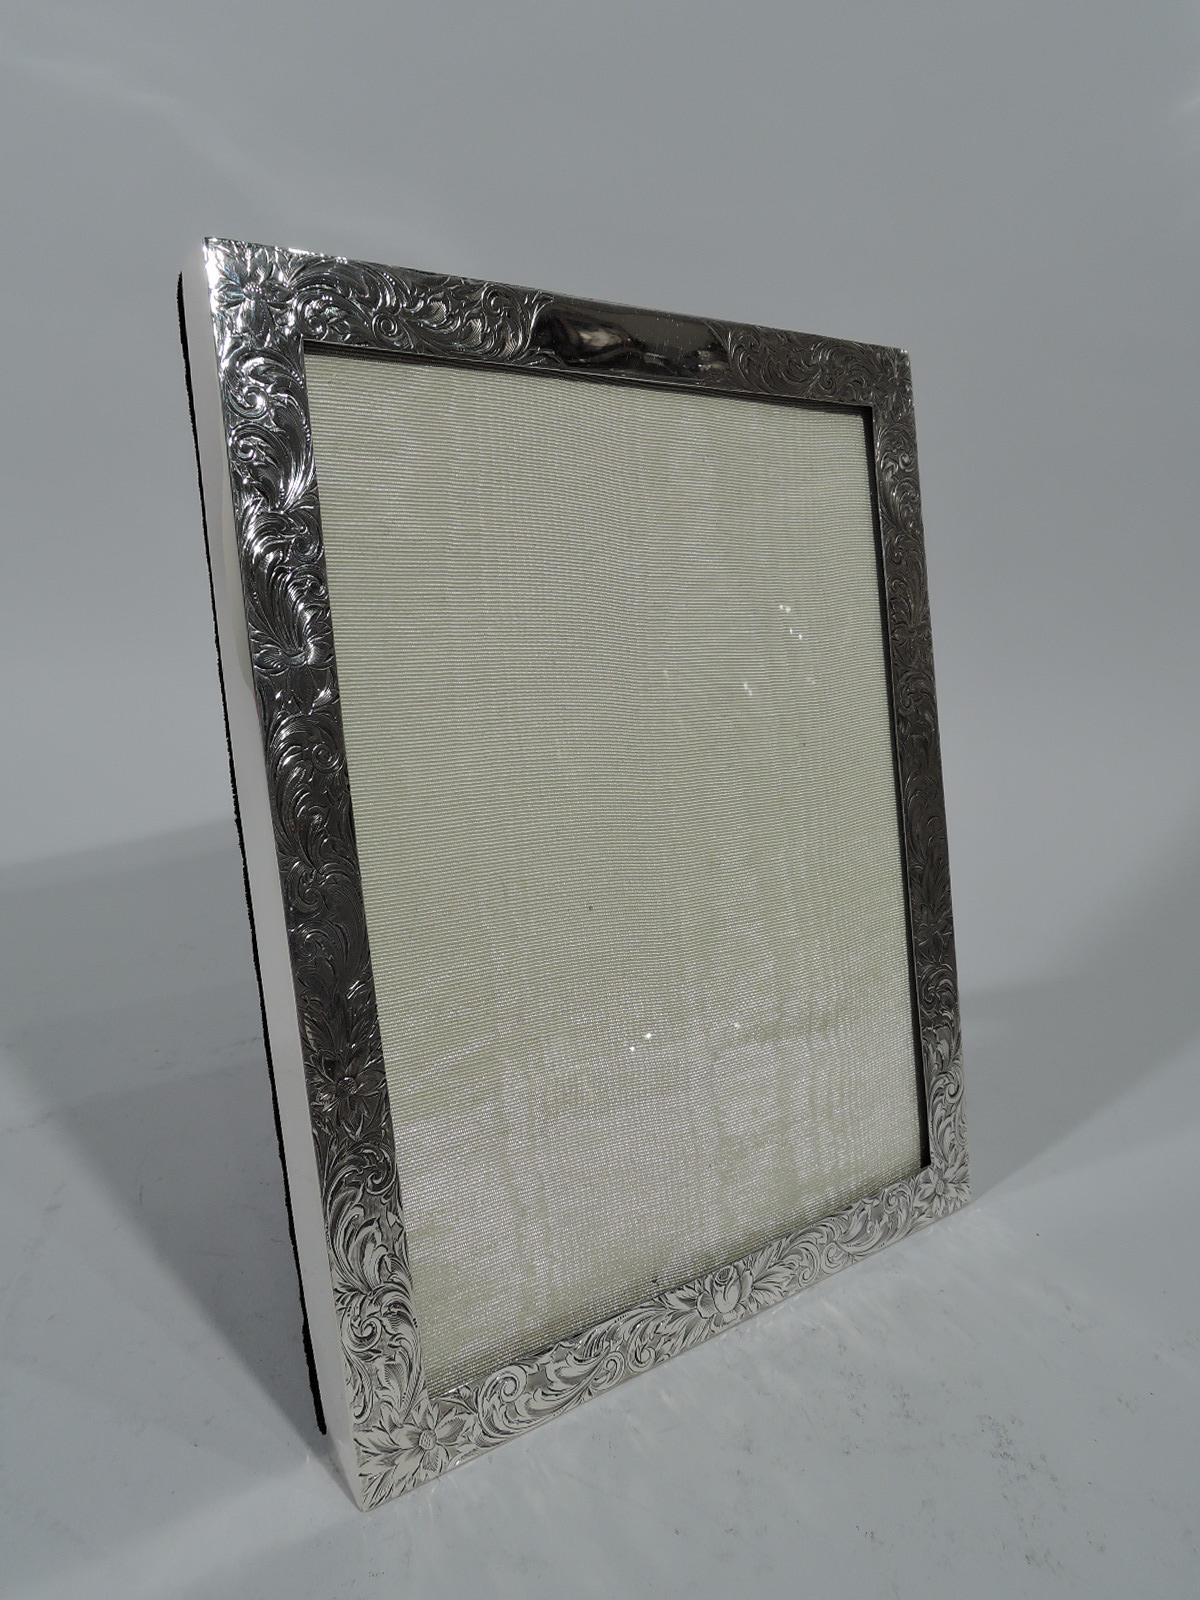 Edwardian sterling silver picture frame. Rectangular window and flat surround engraved with dense flowers and foliate scrolls. Shaped cartouche (vacant). For vertical (portrait) display. With glass, silk lining, and velvet back and hinged support.